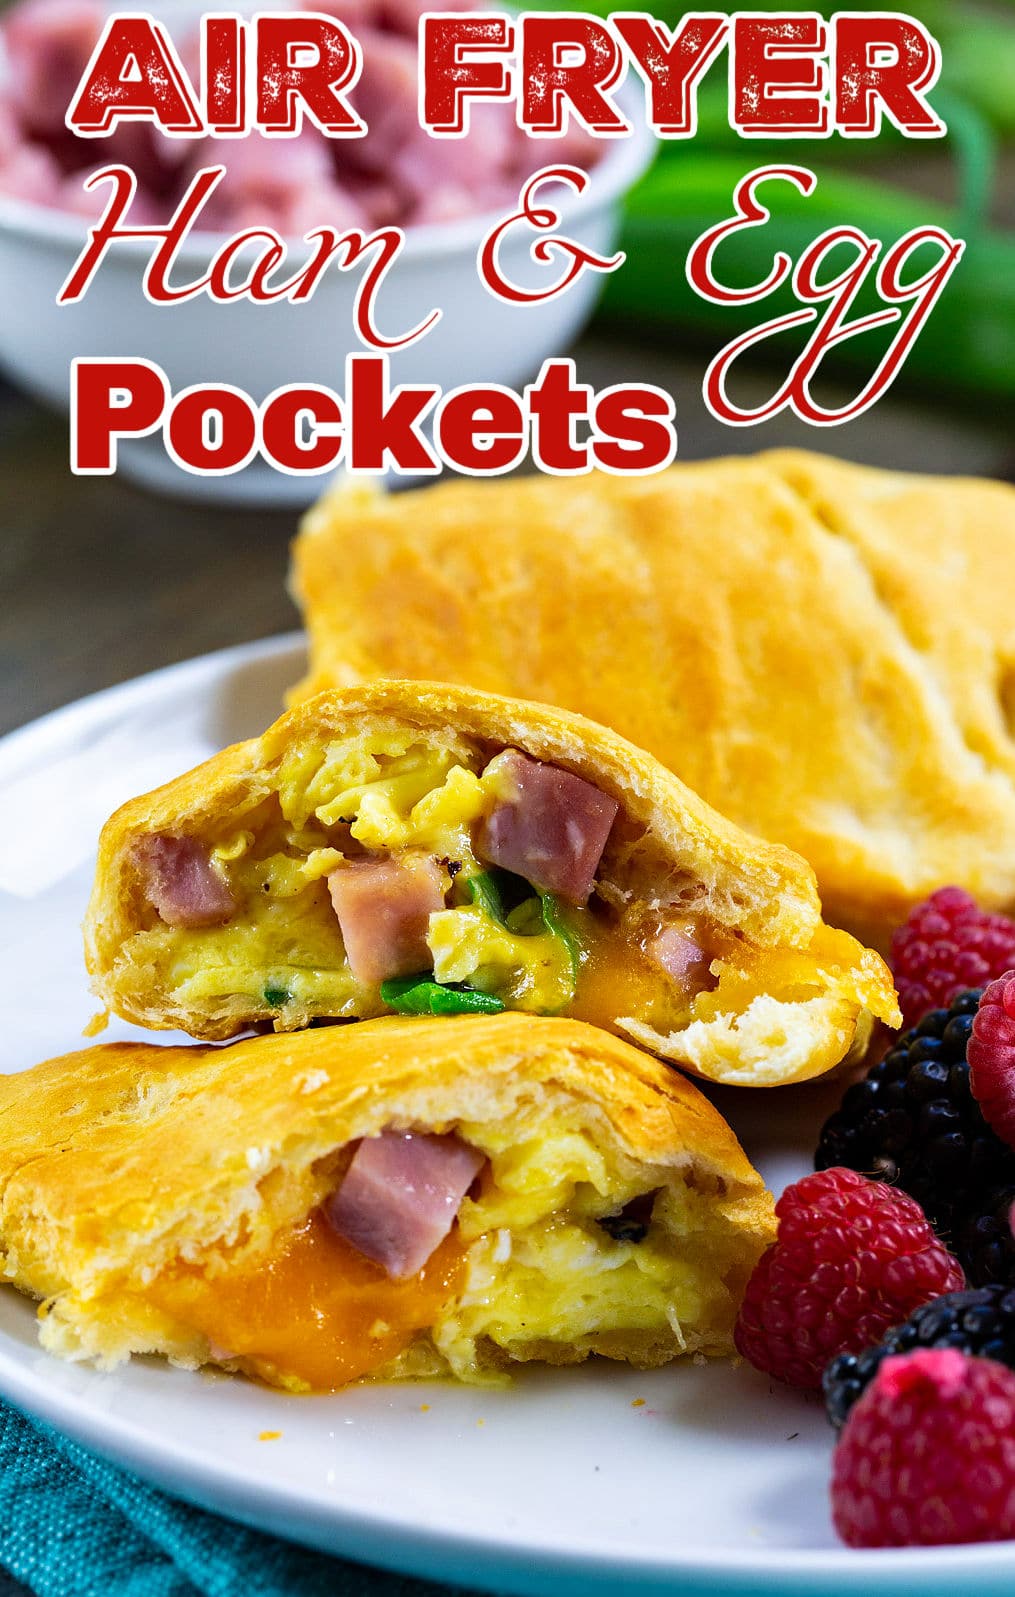 Air Fryer Ham and Egg Pockets on plate with fresh fruit.